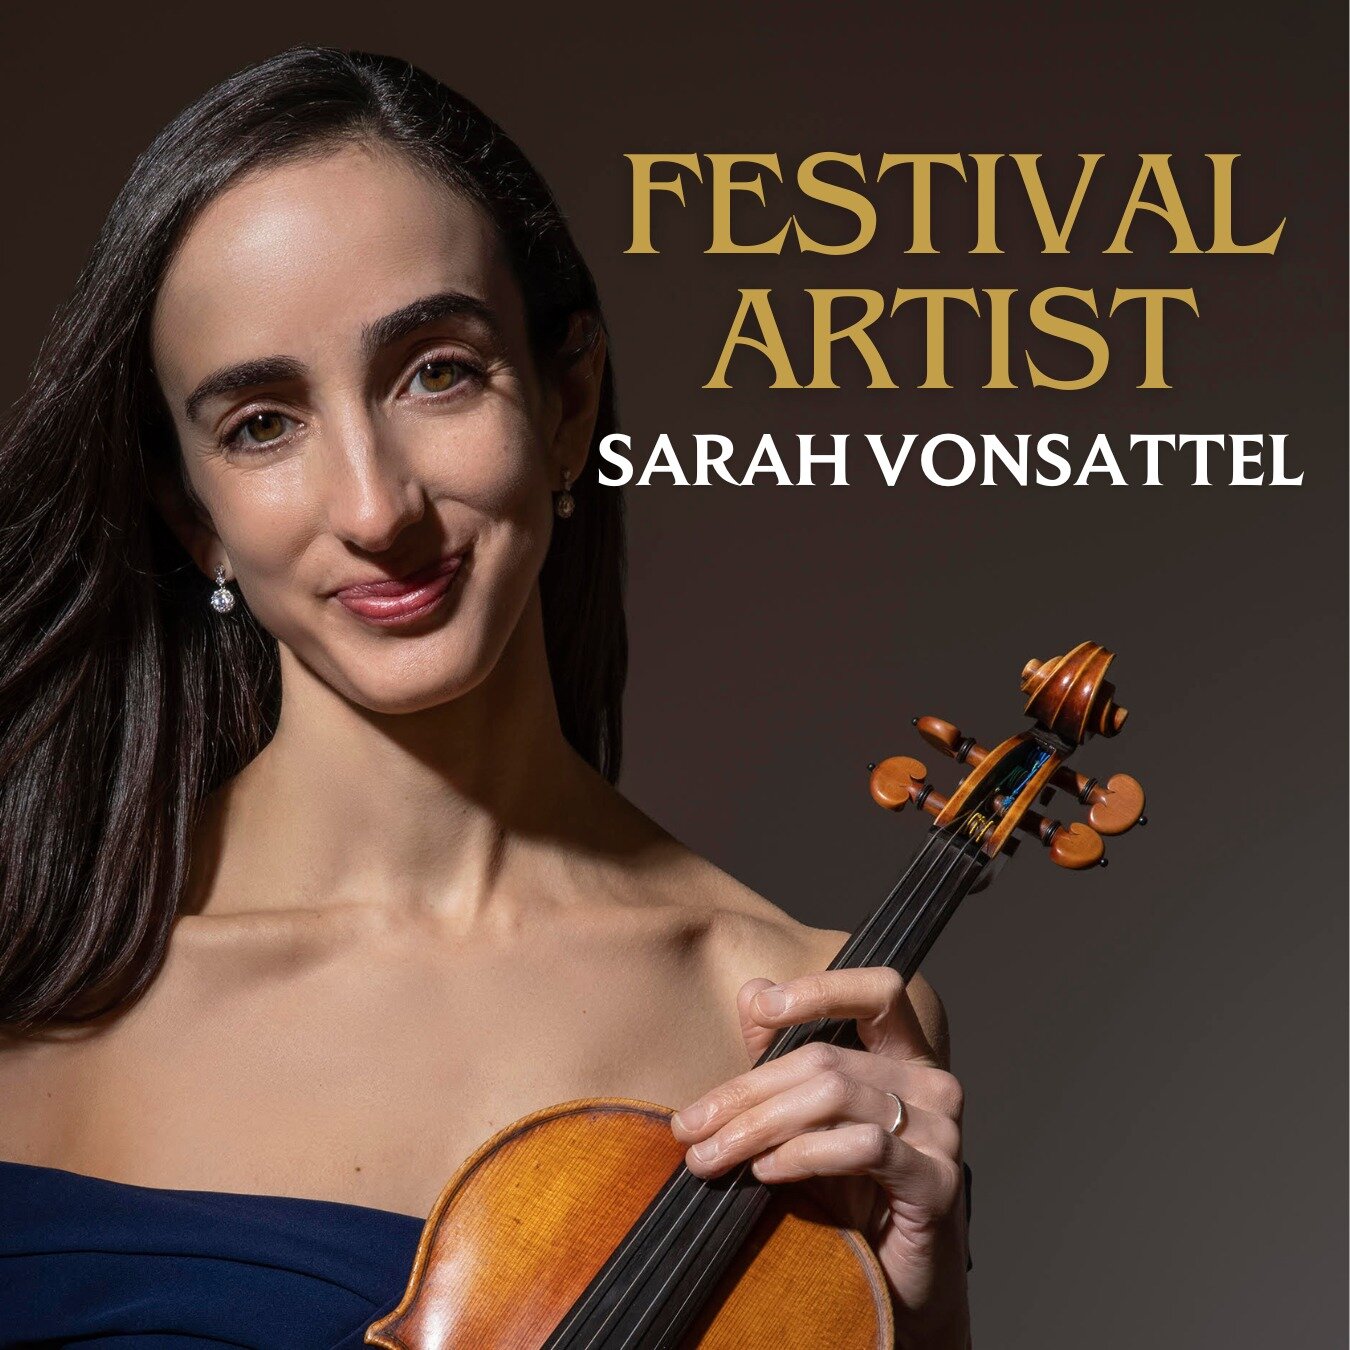 Meet violinist Sarah Vonsattel! 🎻

Sarah has been a member of the Metropolitan Opera Orchestra since 2008. She previously held positions in the Detroit Symphony Orchestra and the Colorado Symphony.

We're excited to have Sarah on our Grand Finale pr